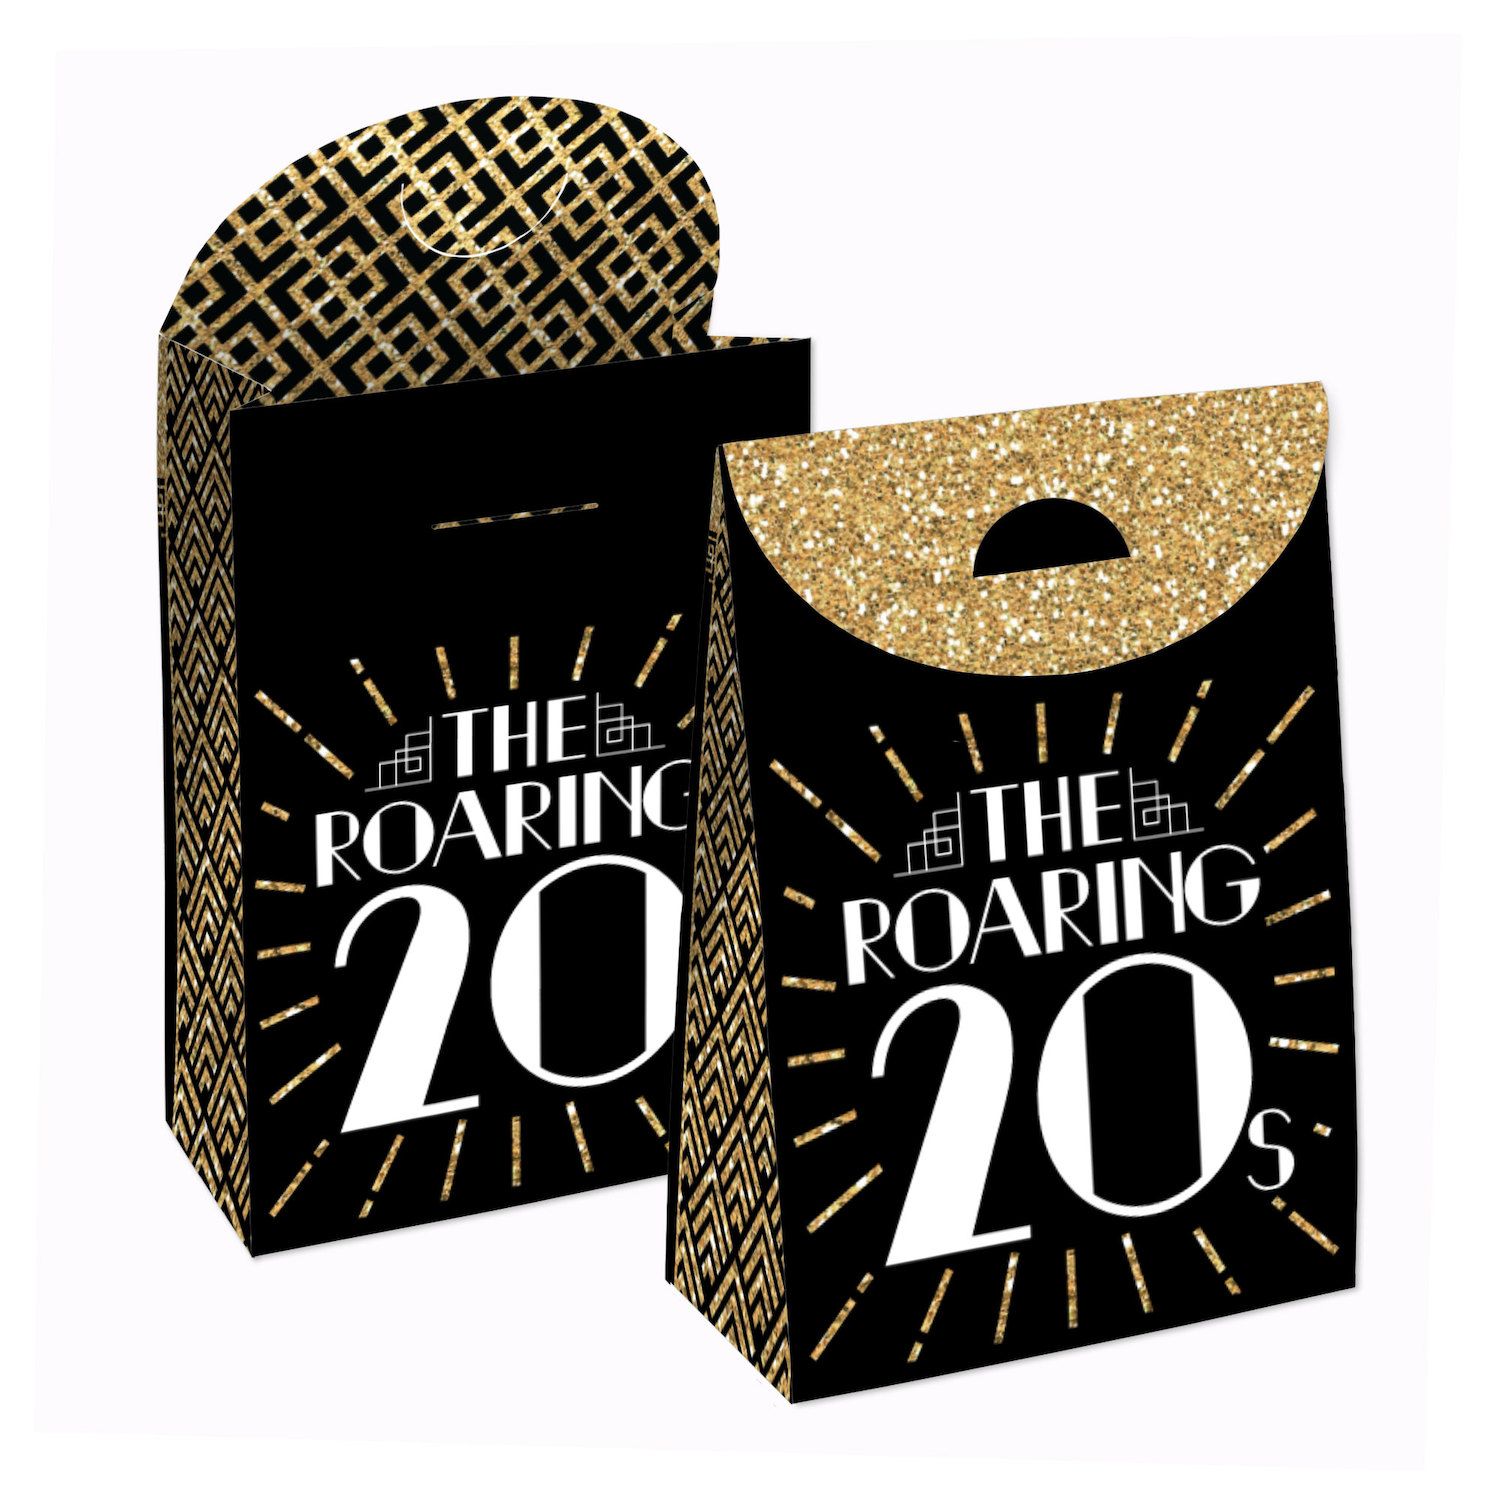 Roaring 20's - 1920s Art Deco Jazz Party Cupcake Wrappers - Set of 12